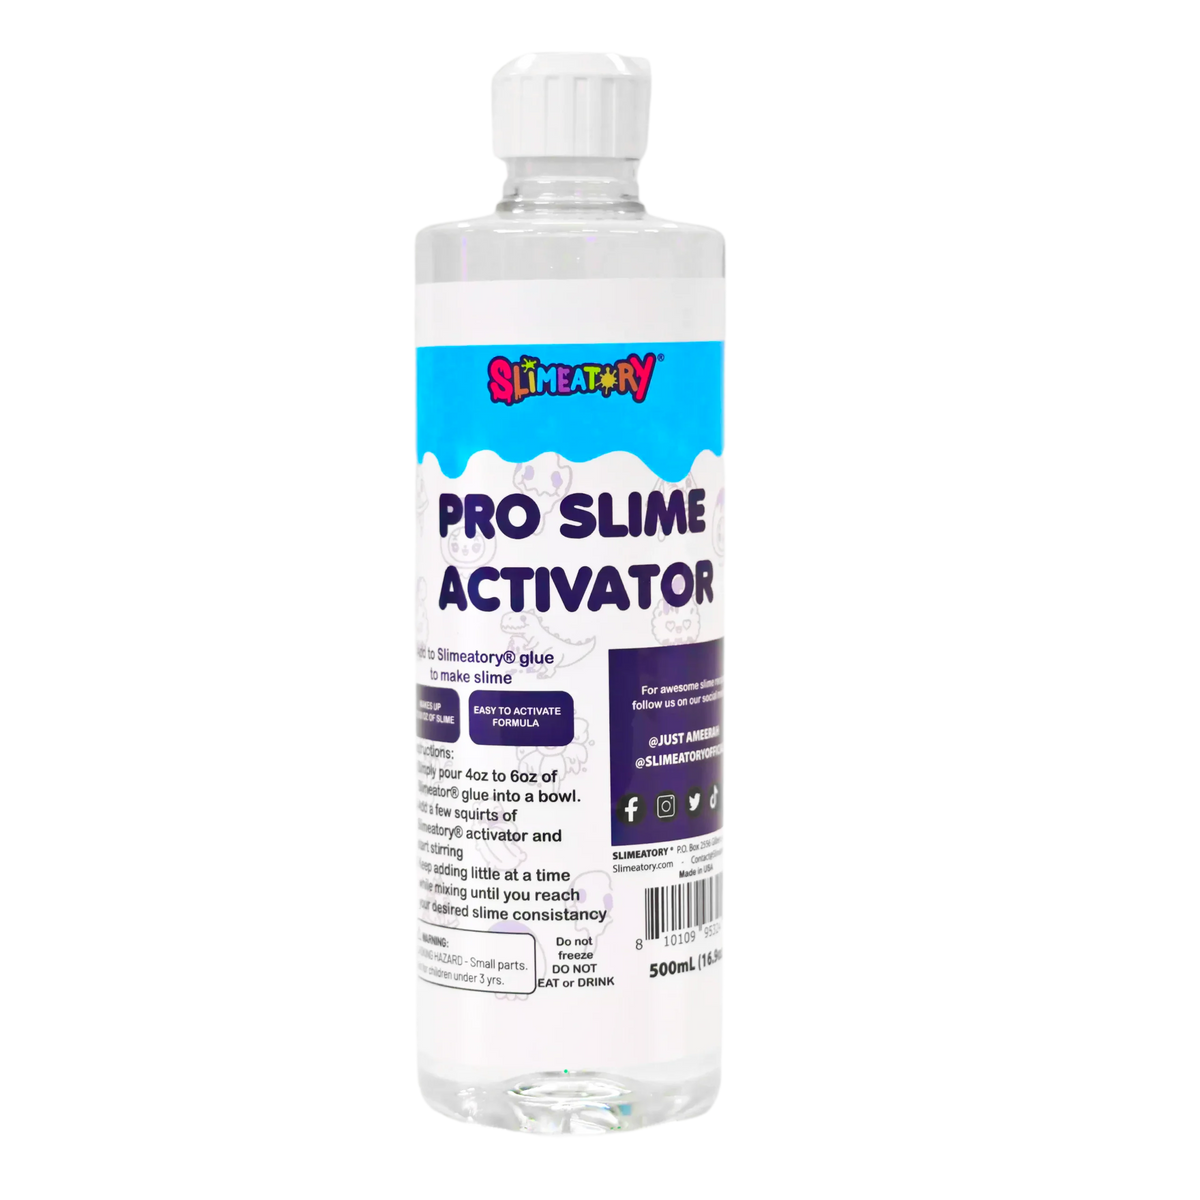 how to make slime activator 100% working with proof